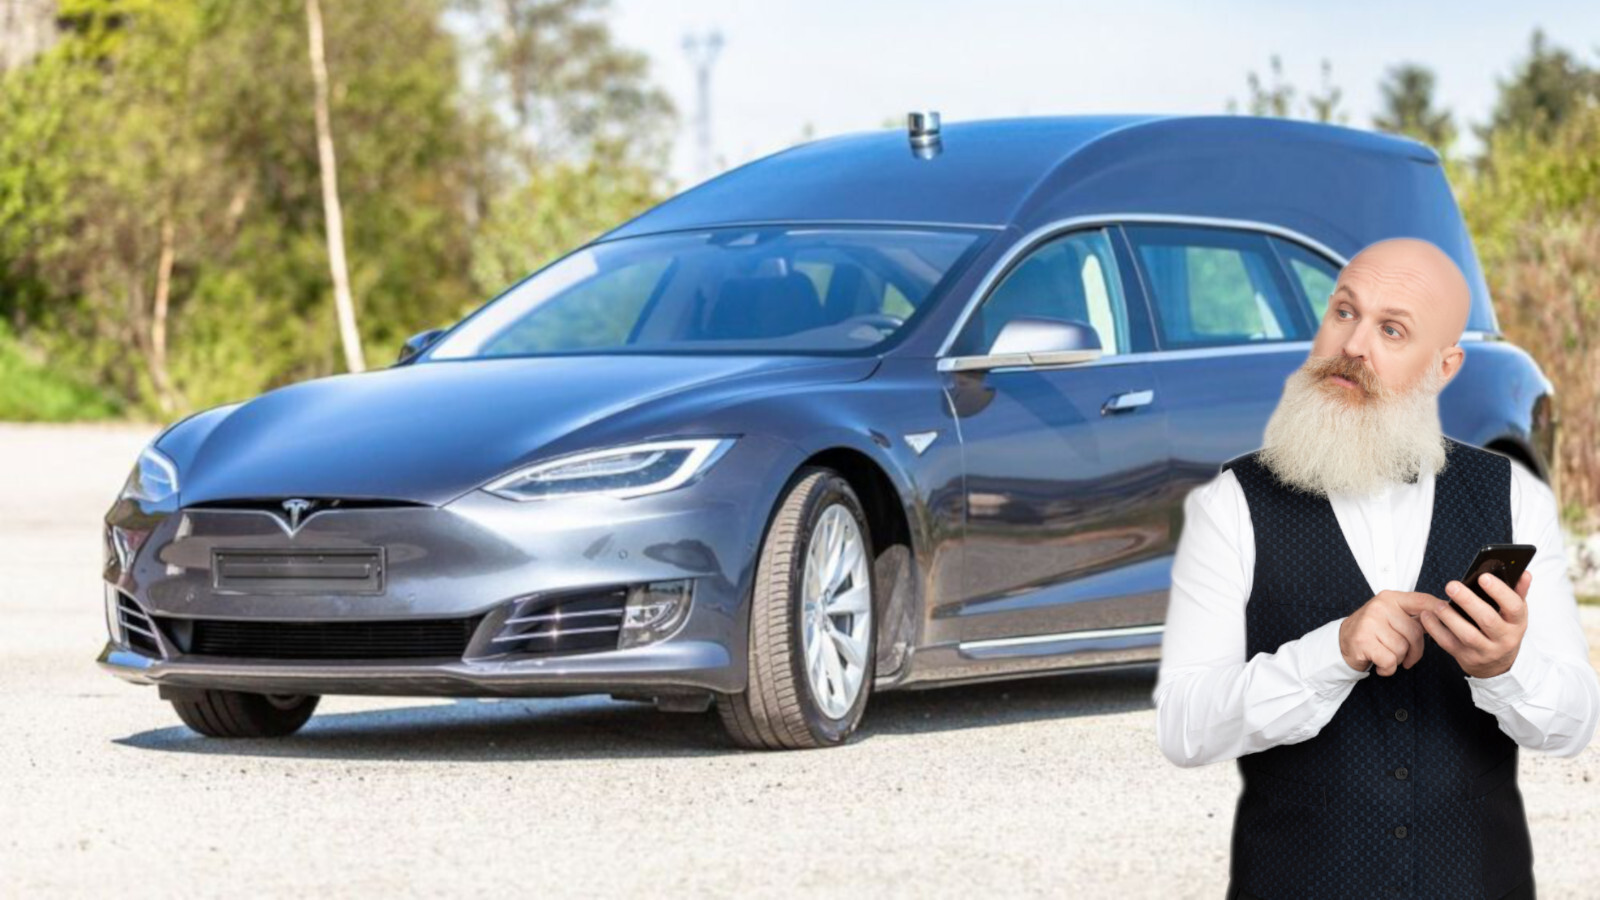 Carbon offset your death with this $200K ‘Frankensteined’ Tesla hearse